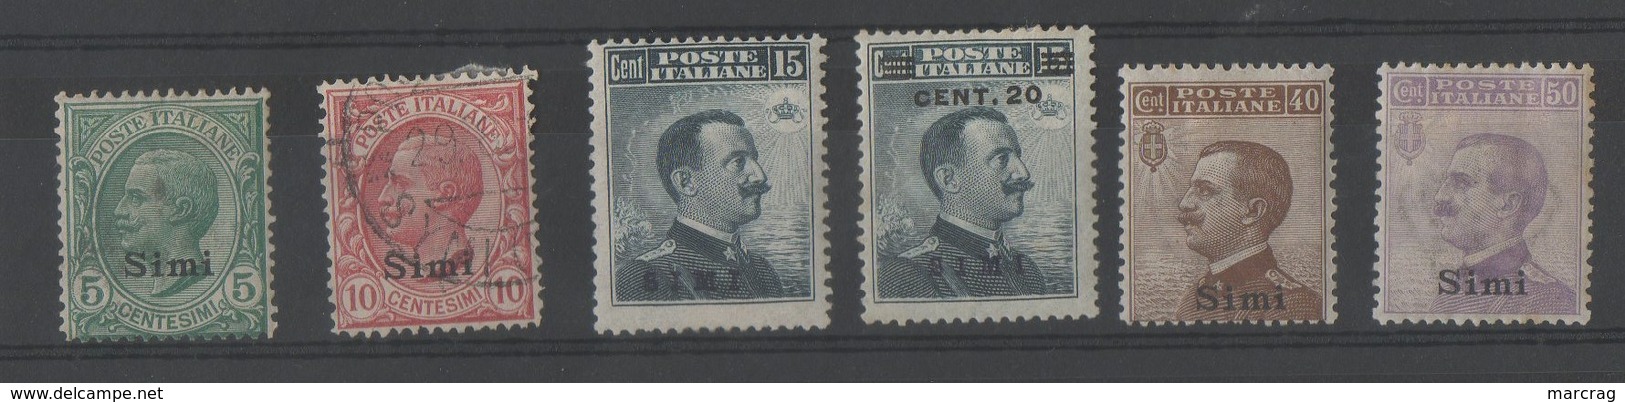 TIMBRES AVEC CHARNIERES OCCUPATION ITALIENNE - Aegean (Simi)